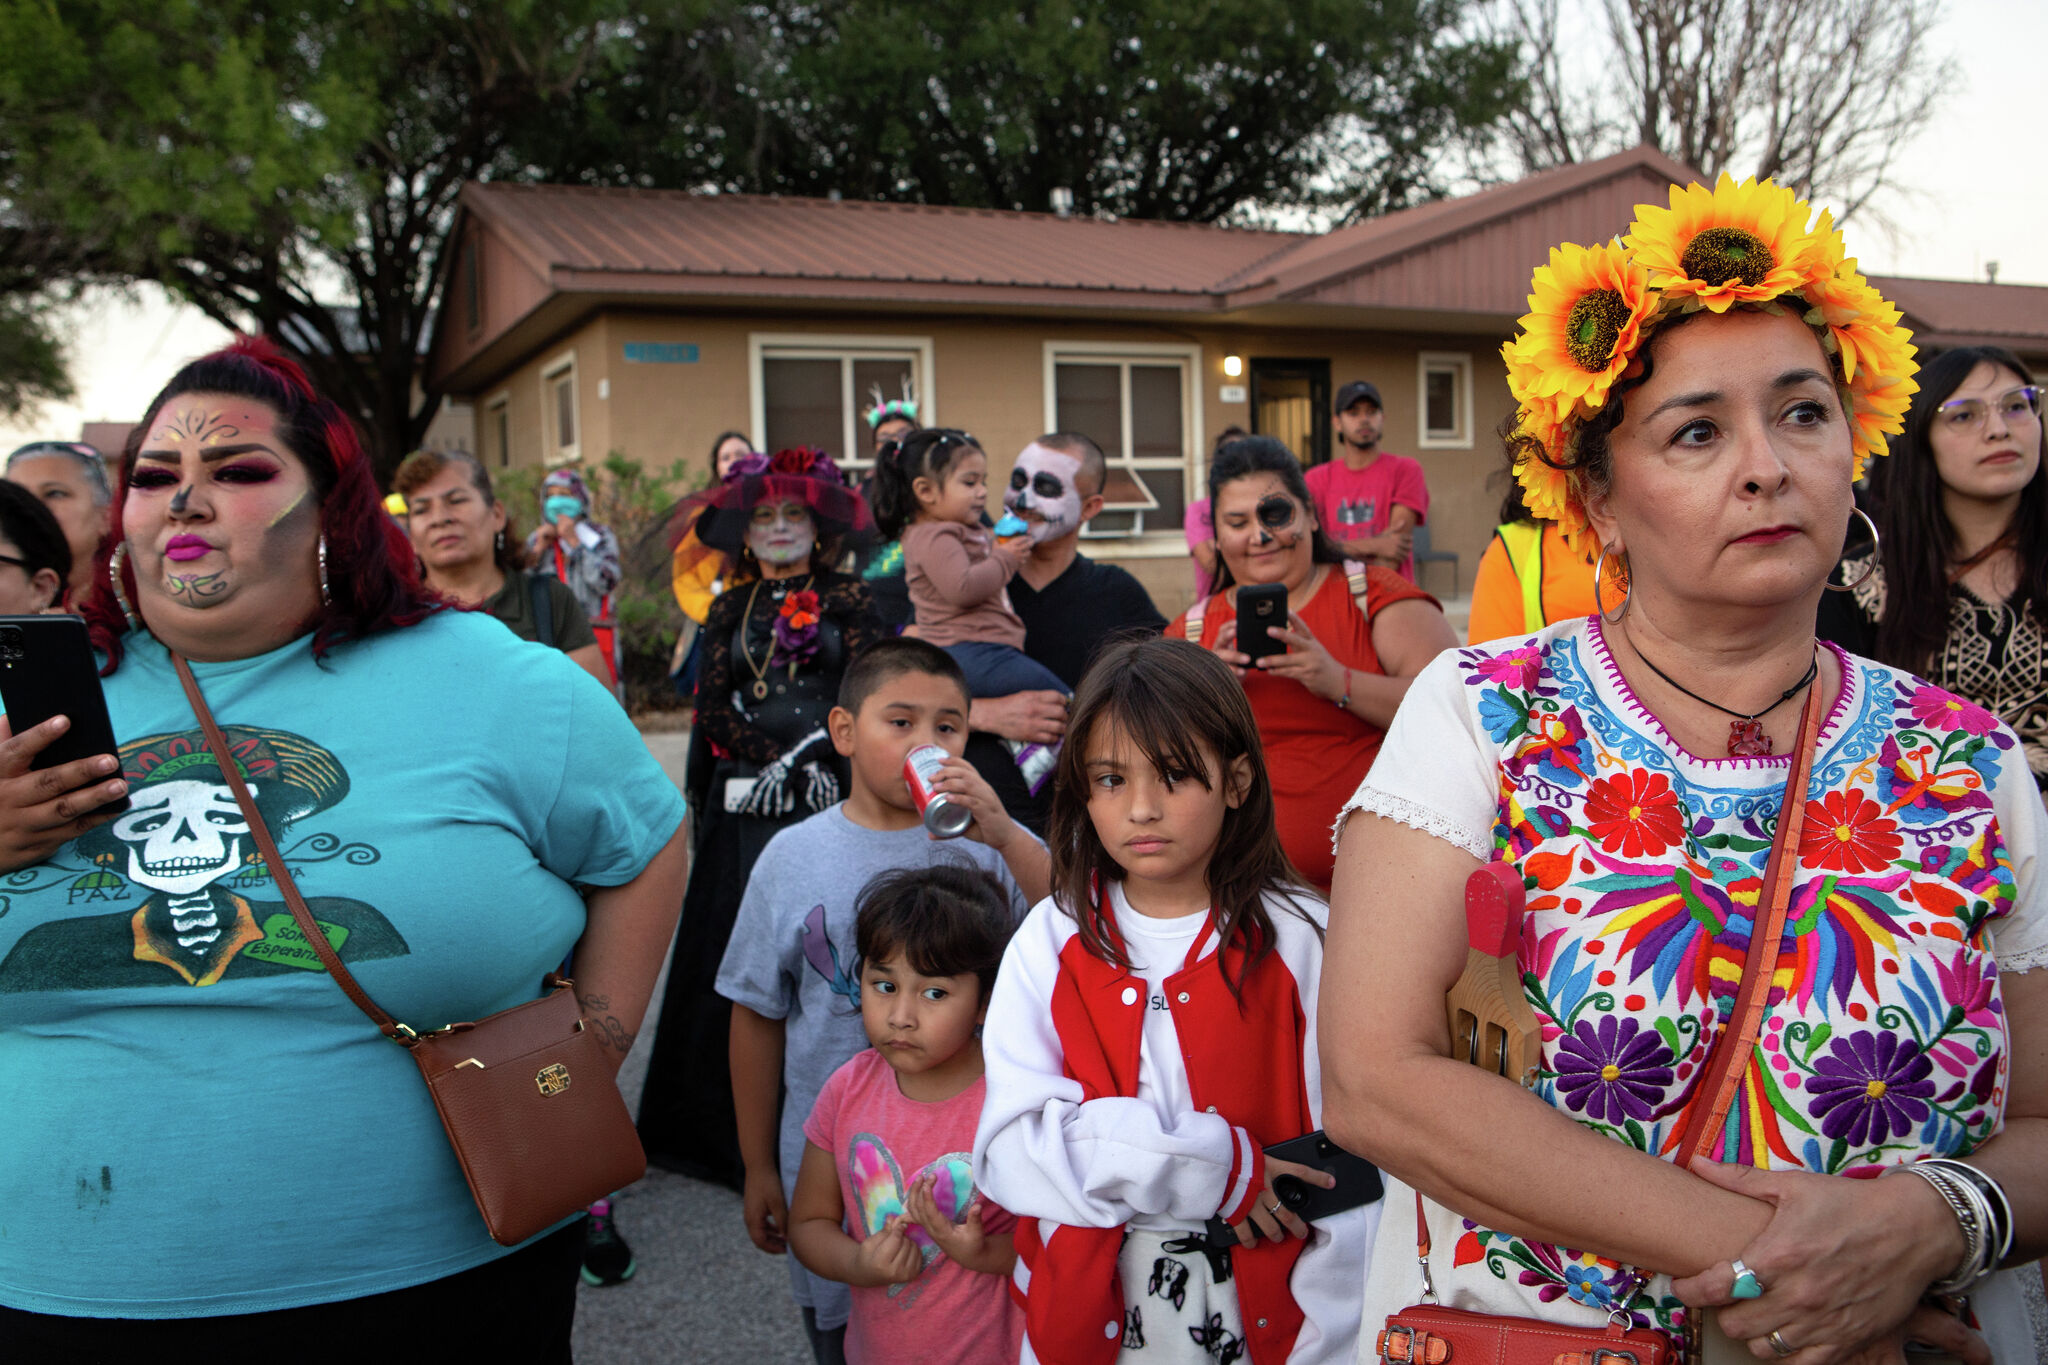 San Antonio is a travel destination for its Day of the Dead events